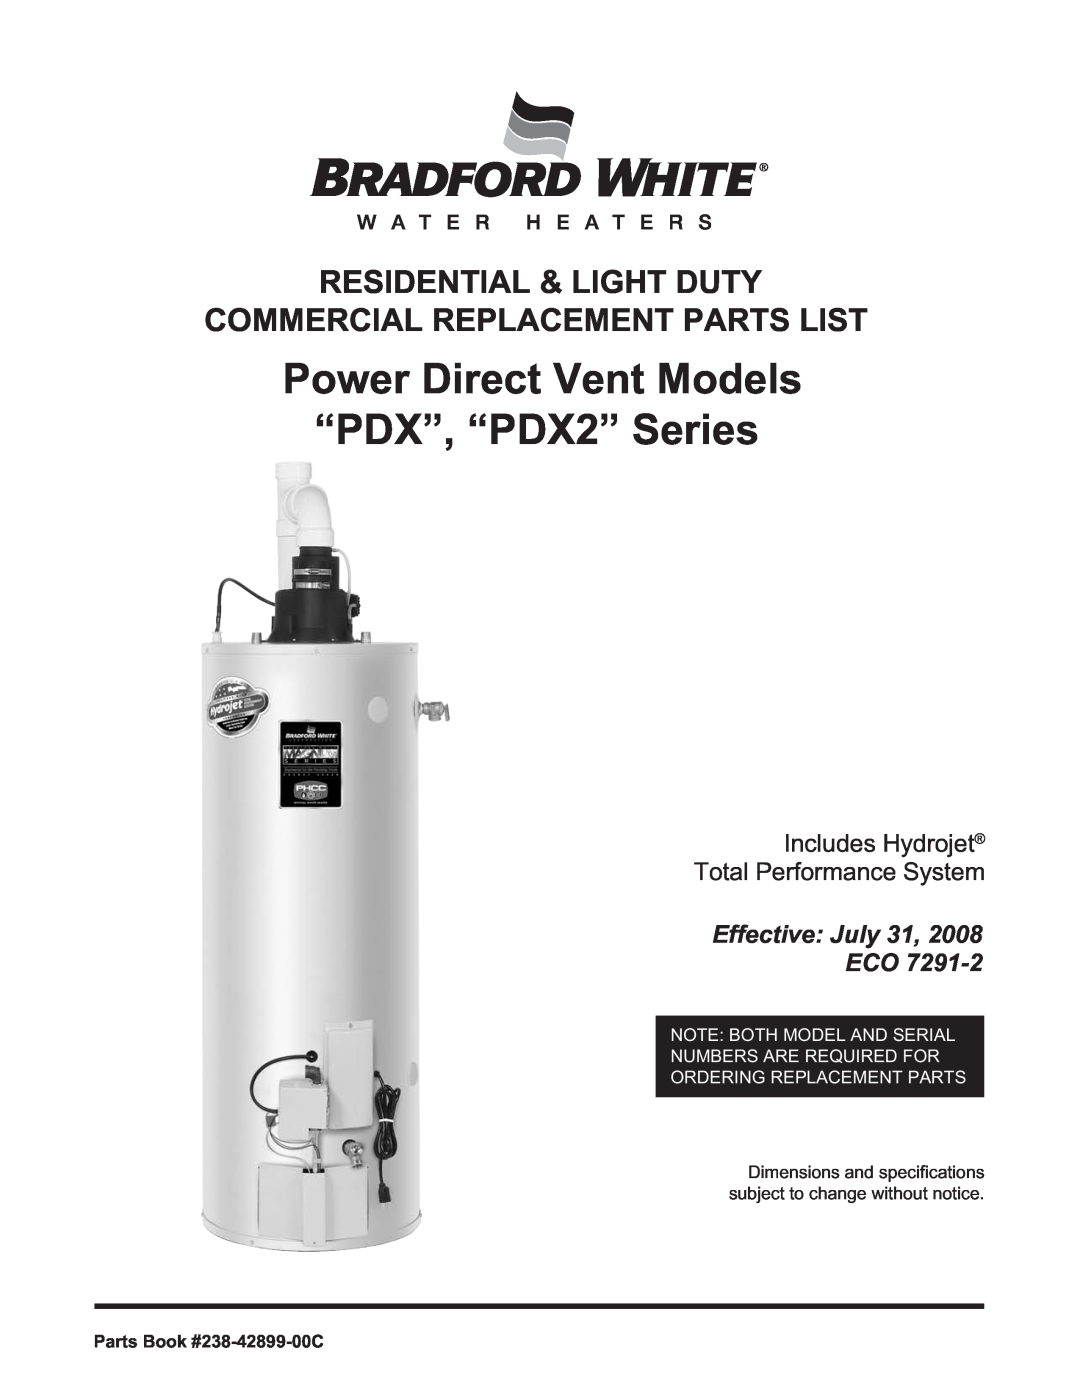 Bradford-White Corp dimensions Power Direct Vent Models “PDX”, “PDX2” Series, Effective July 31 ECO 